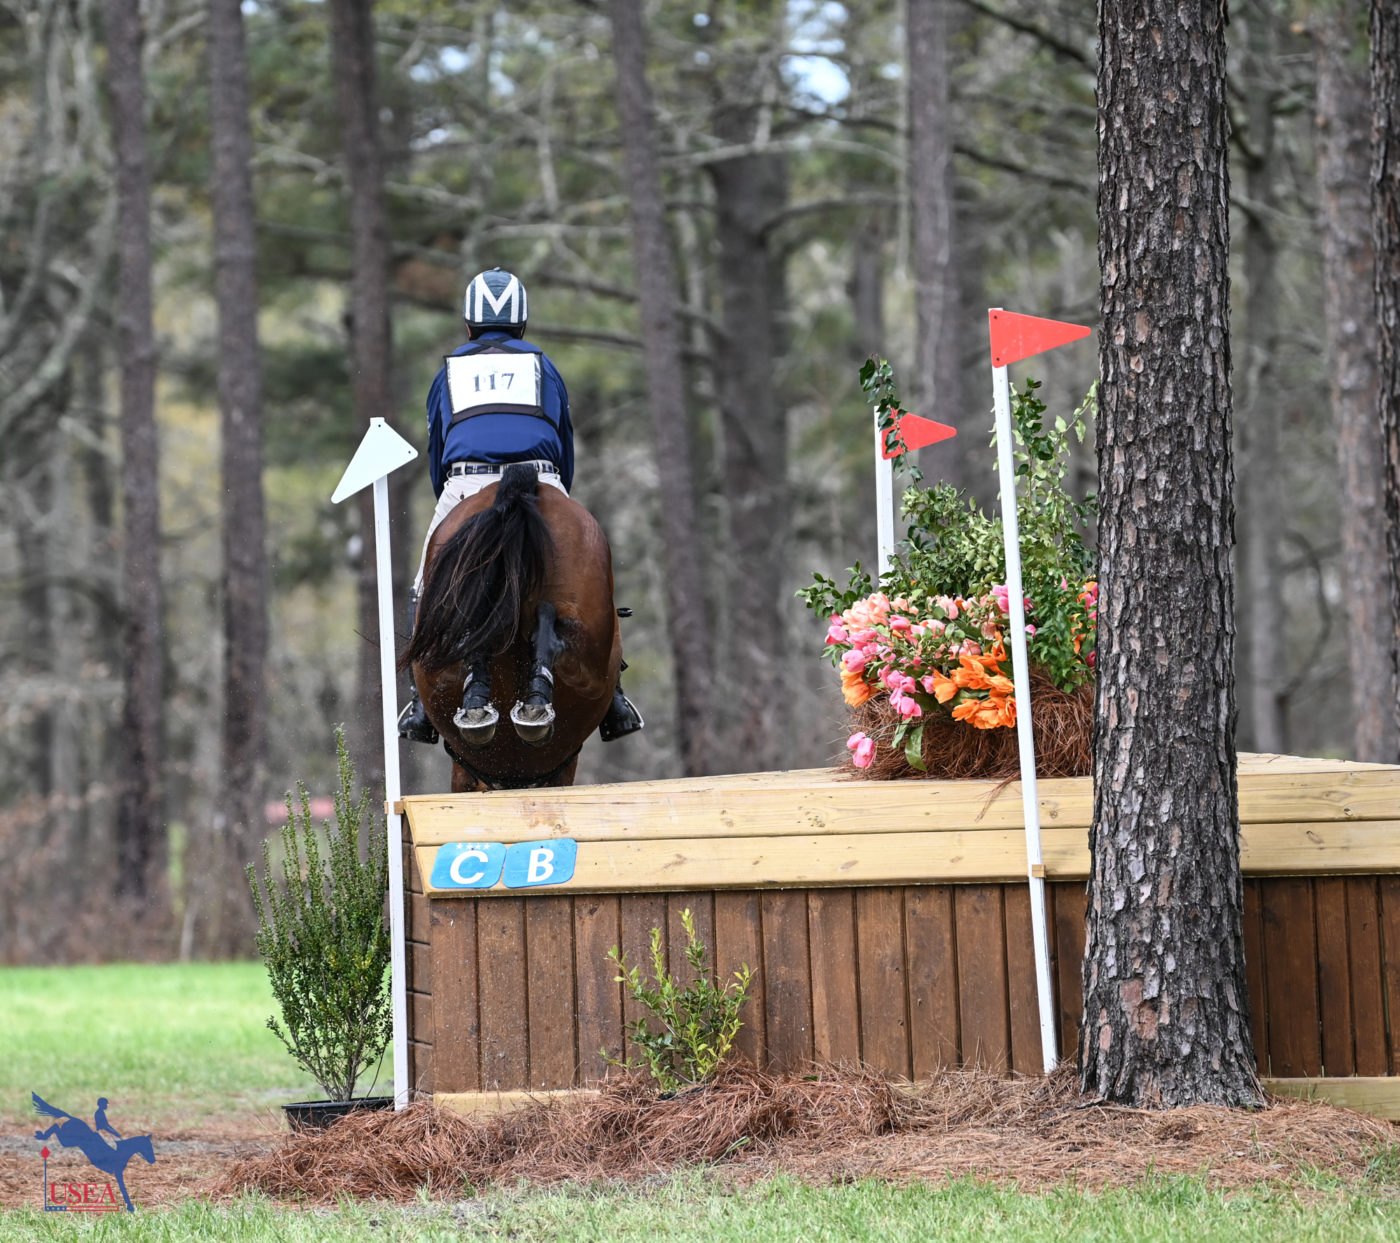 Andrew McConnon jumped the Advanced corner out of the water with Wakita 54. USEA/Lindsay Berreth photo